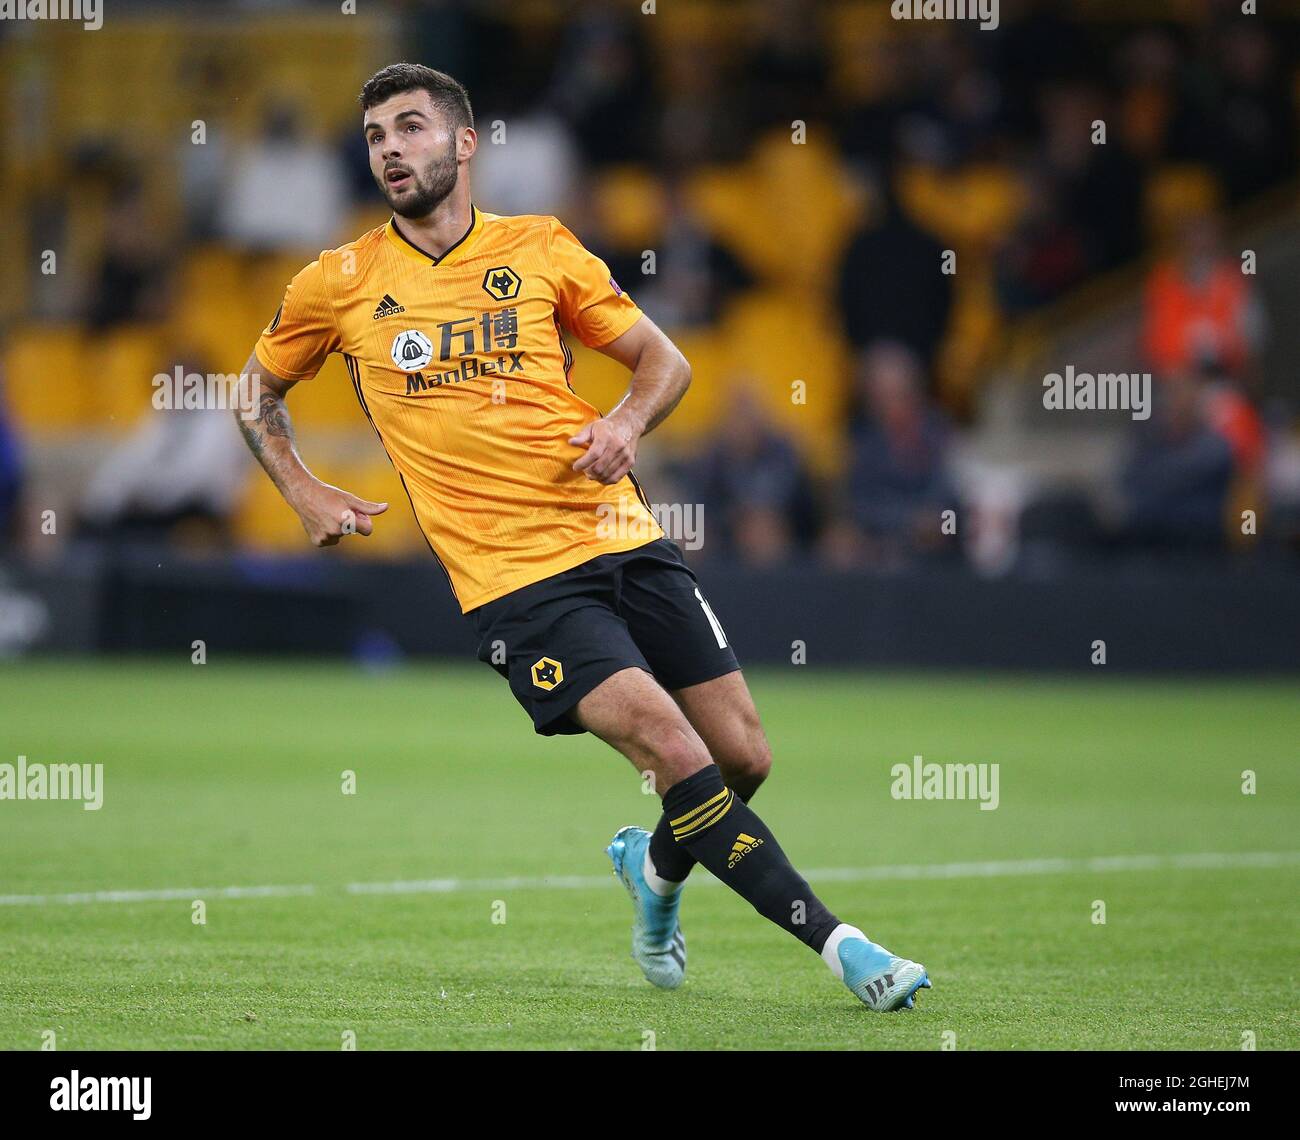 Patrick Cutrone of Wolverhampton Wanderers during the UEFA Europa League  match at Molineux, Wolverhampton. Picture date: 19th September 2019.  Picture credit should read: Nigel French/Sportimage via PA Images Stock  Photo - Alamy